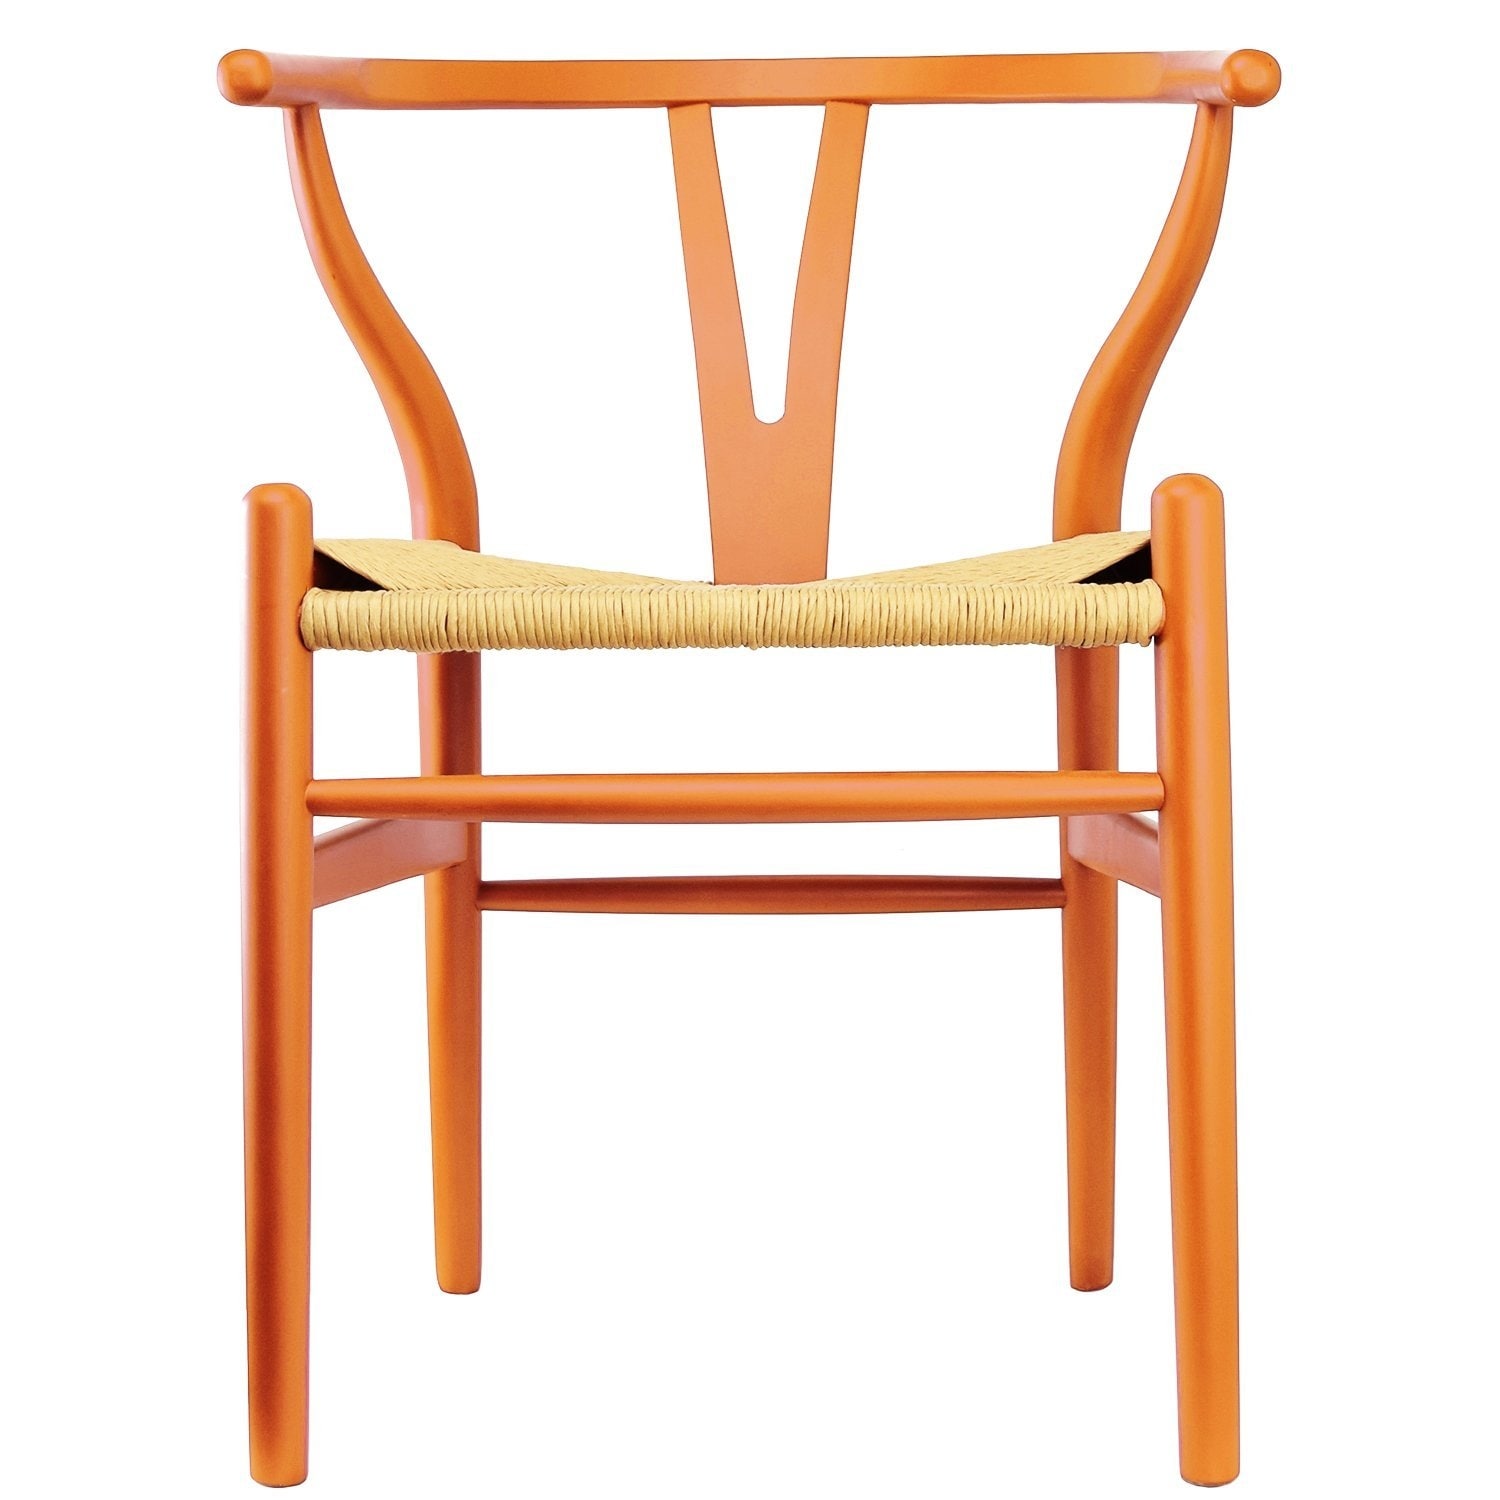 (Retired) 2xhome - Orange Modern Wood Dining Chair With Back Arm Armchair Hemp Seat For Home Restaurant Office